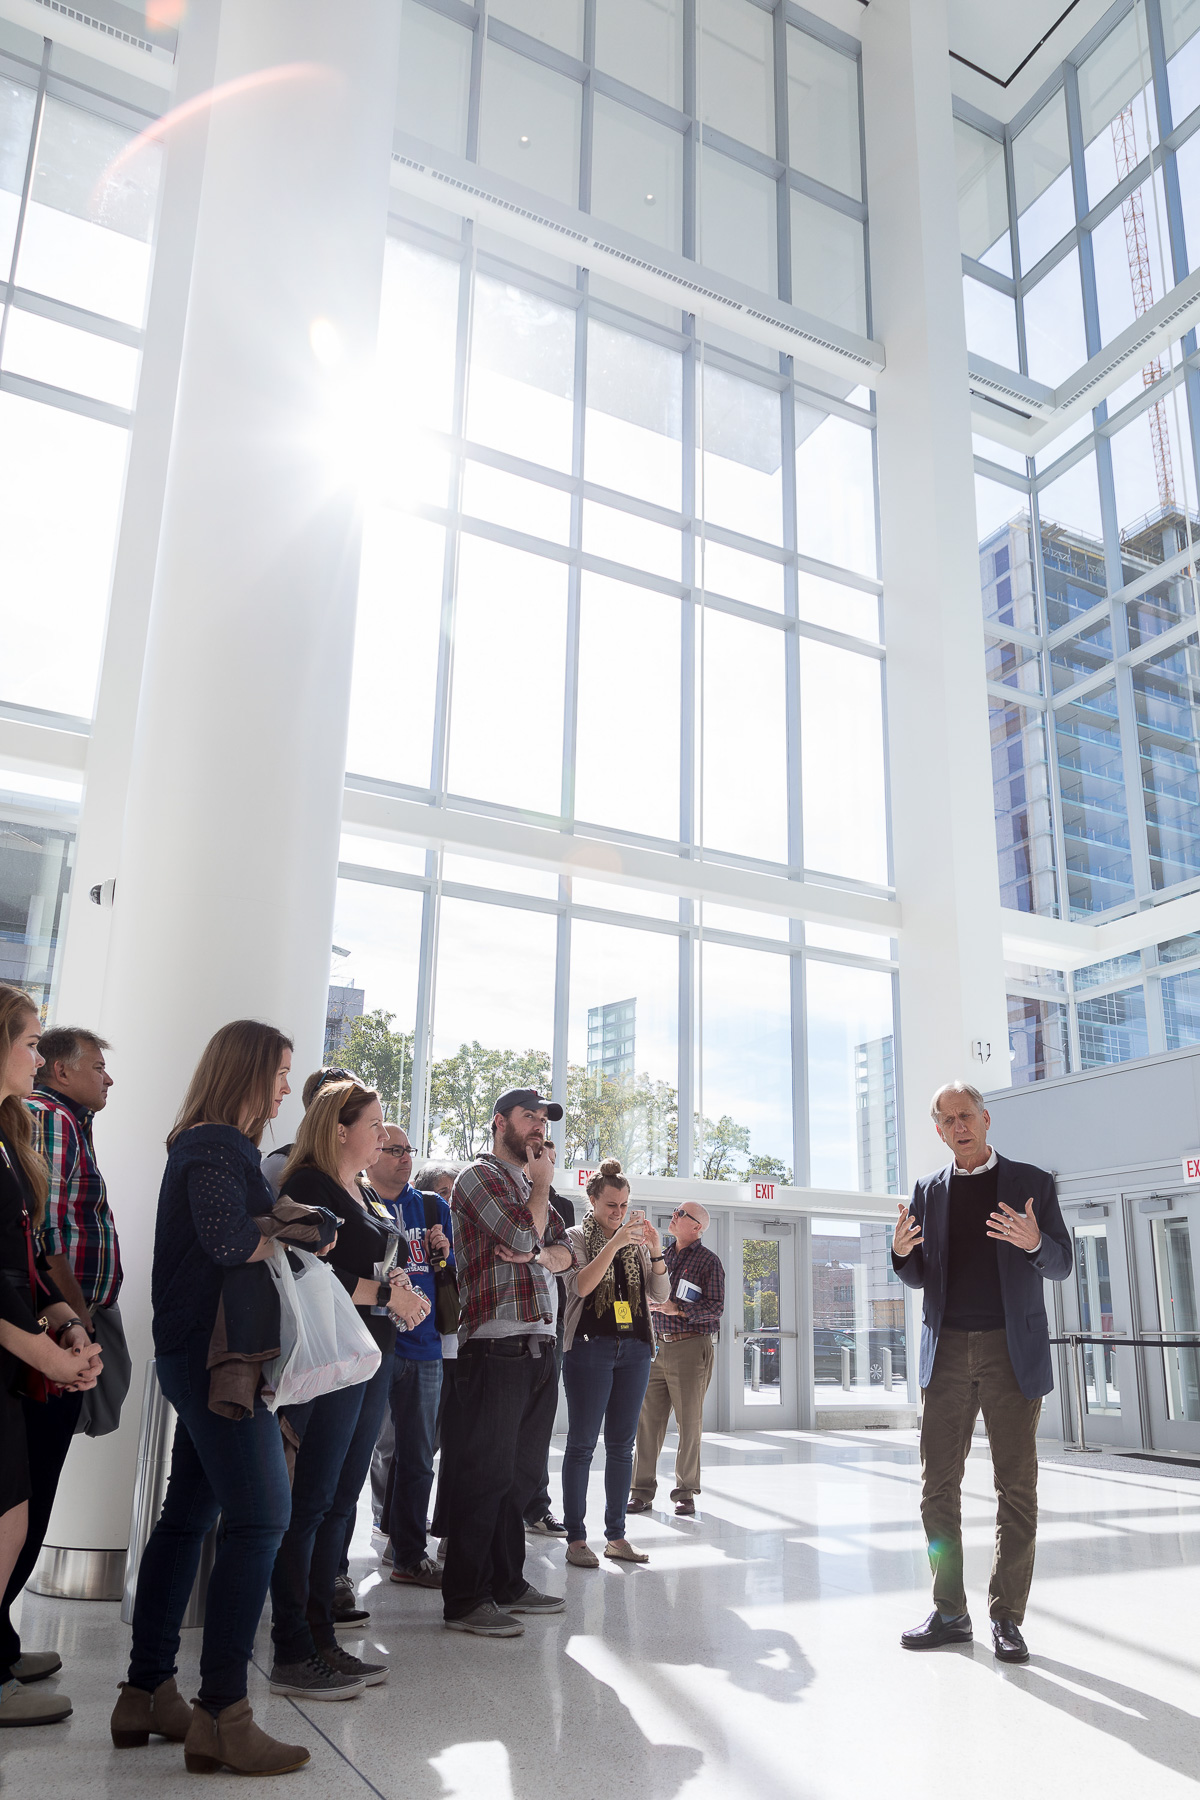 Mitchell Hirsch, principal architect for Pelli Clarke Pelli Architects, speaks to attendees in the atrium of Wintrust Arena during a sneak peek tour. (DePaul University/Jeff Carrion)